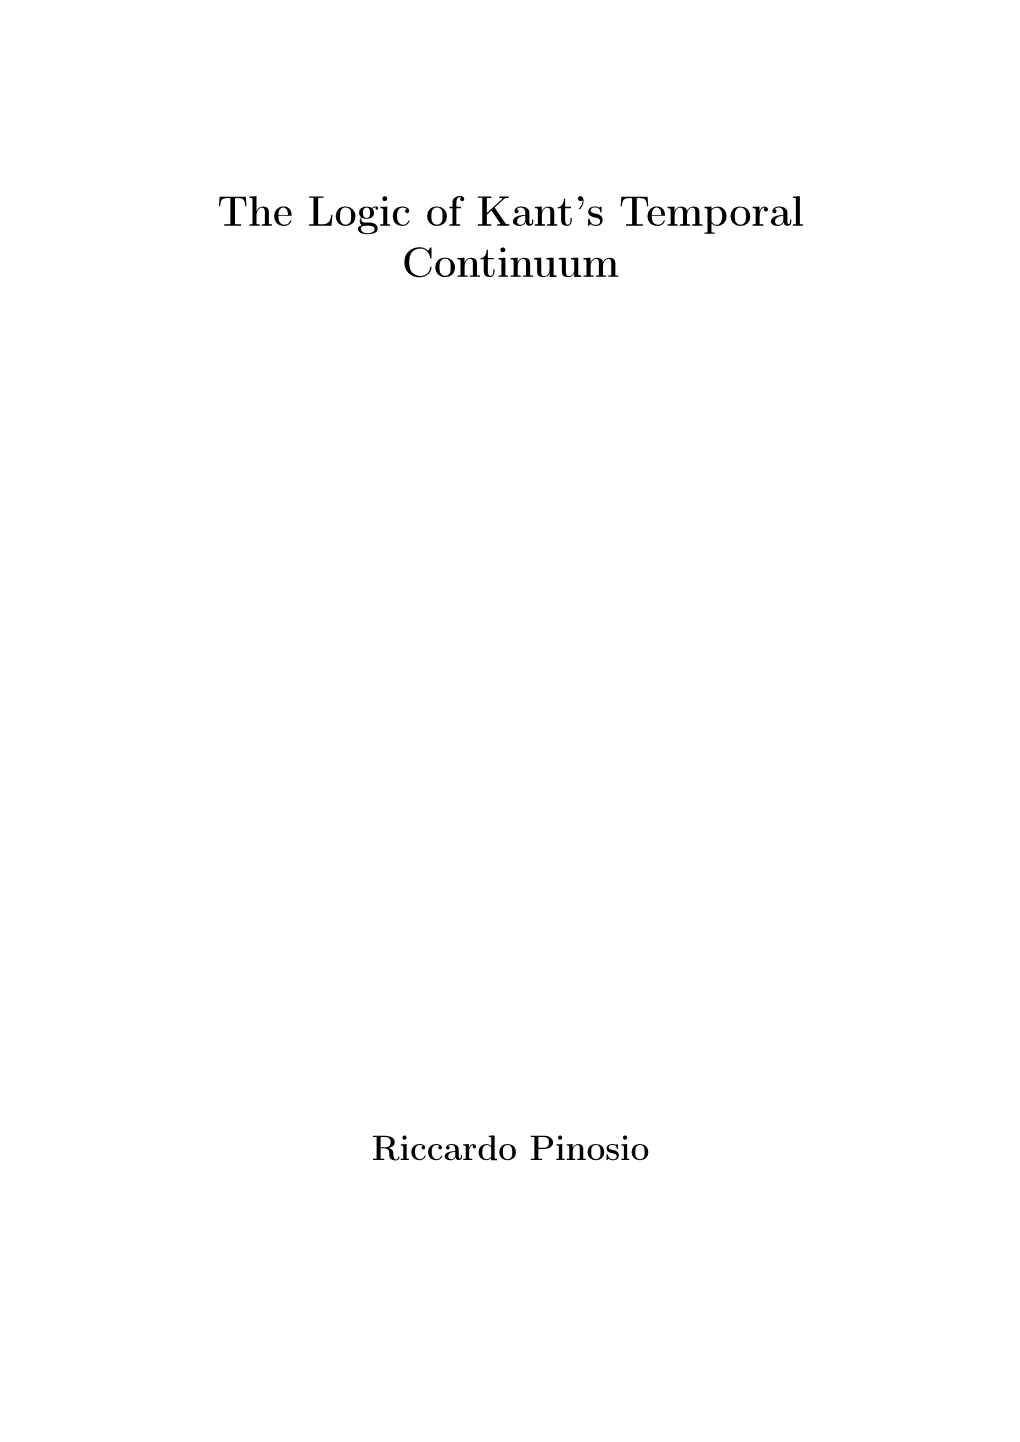 The Logic of Kant's Temporal Continuum